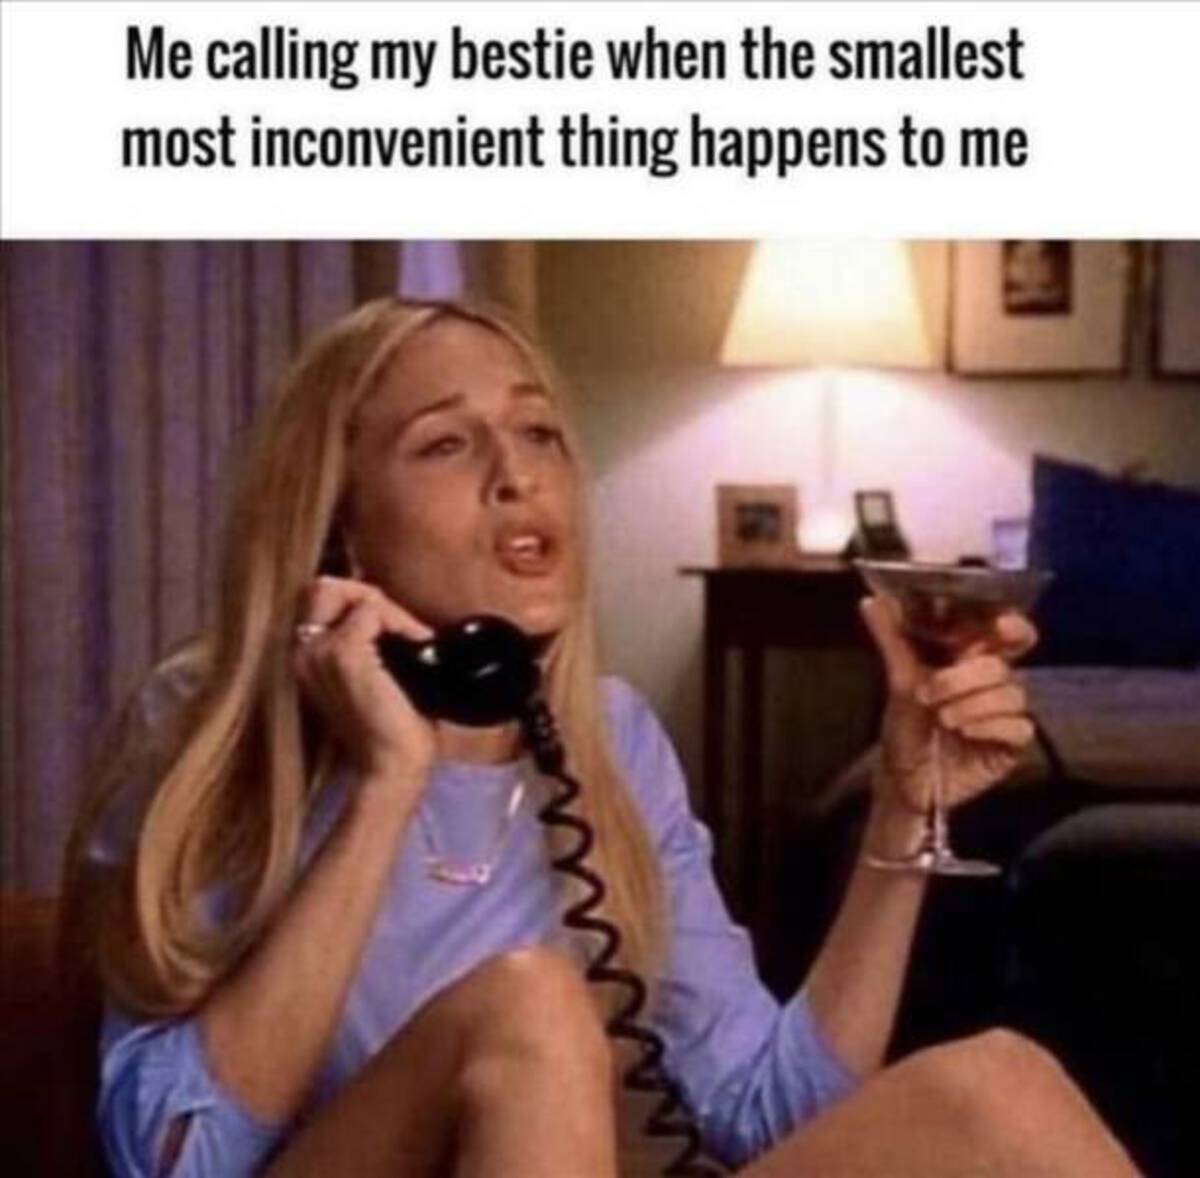 dark funny memes for my bestie - Me calling my bestie when the smallest most inconvenient thing happens to me